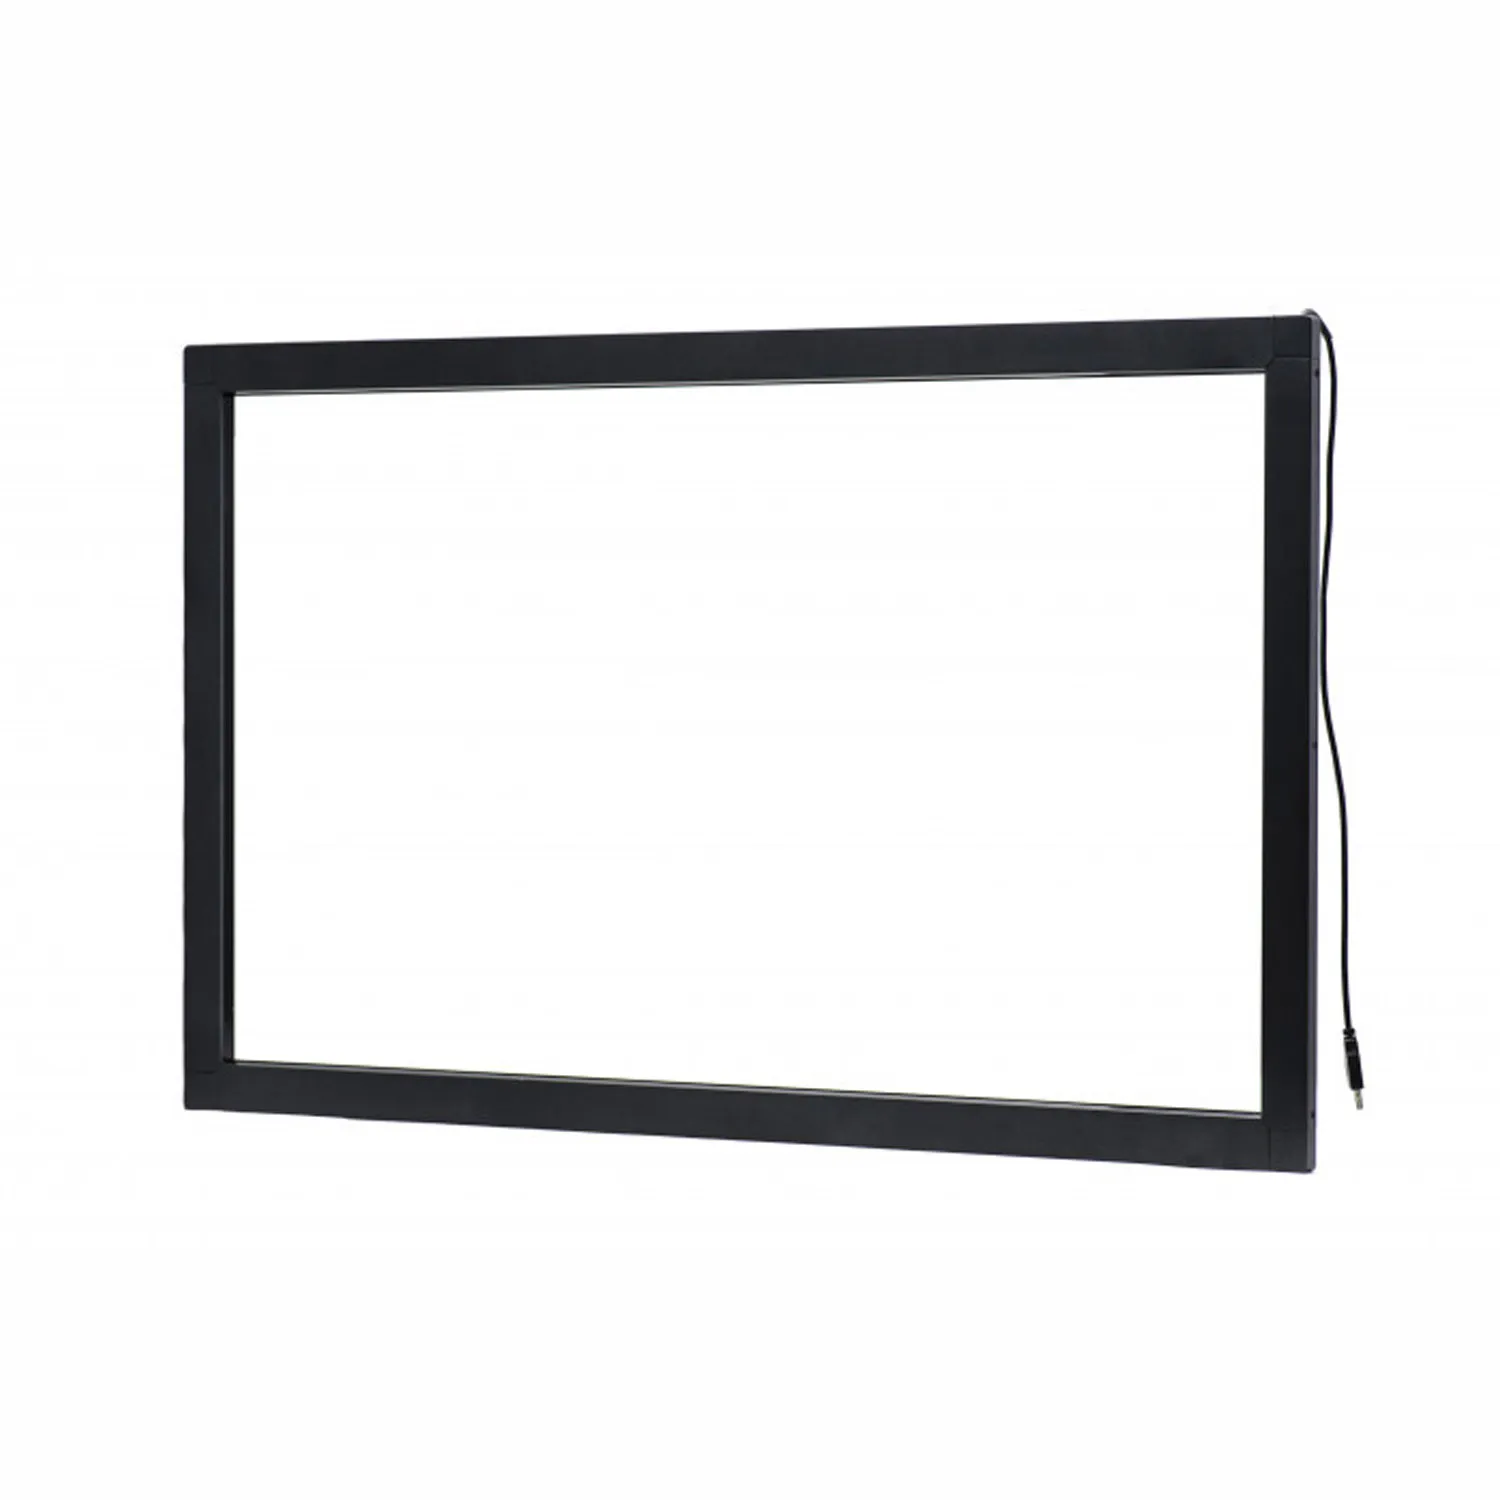 Touch frame Keetouch GmbH 42" KP-420-IP0S001